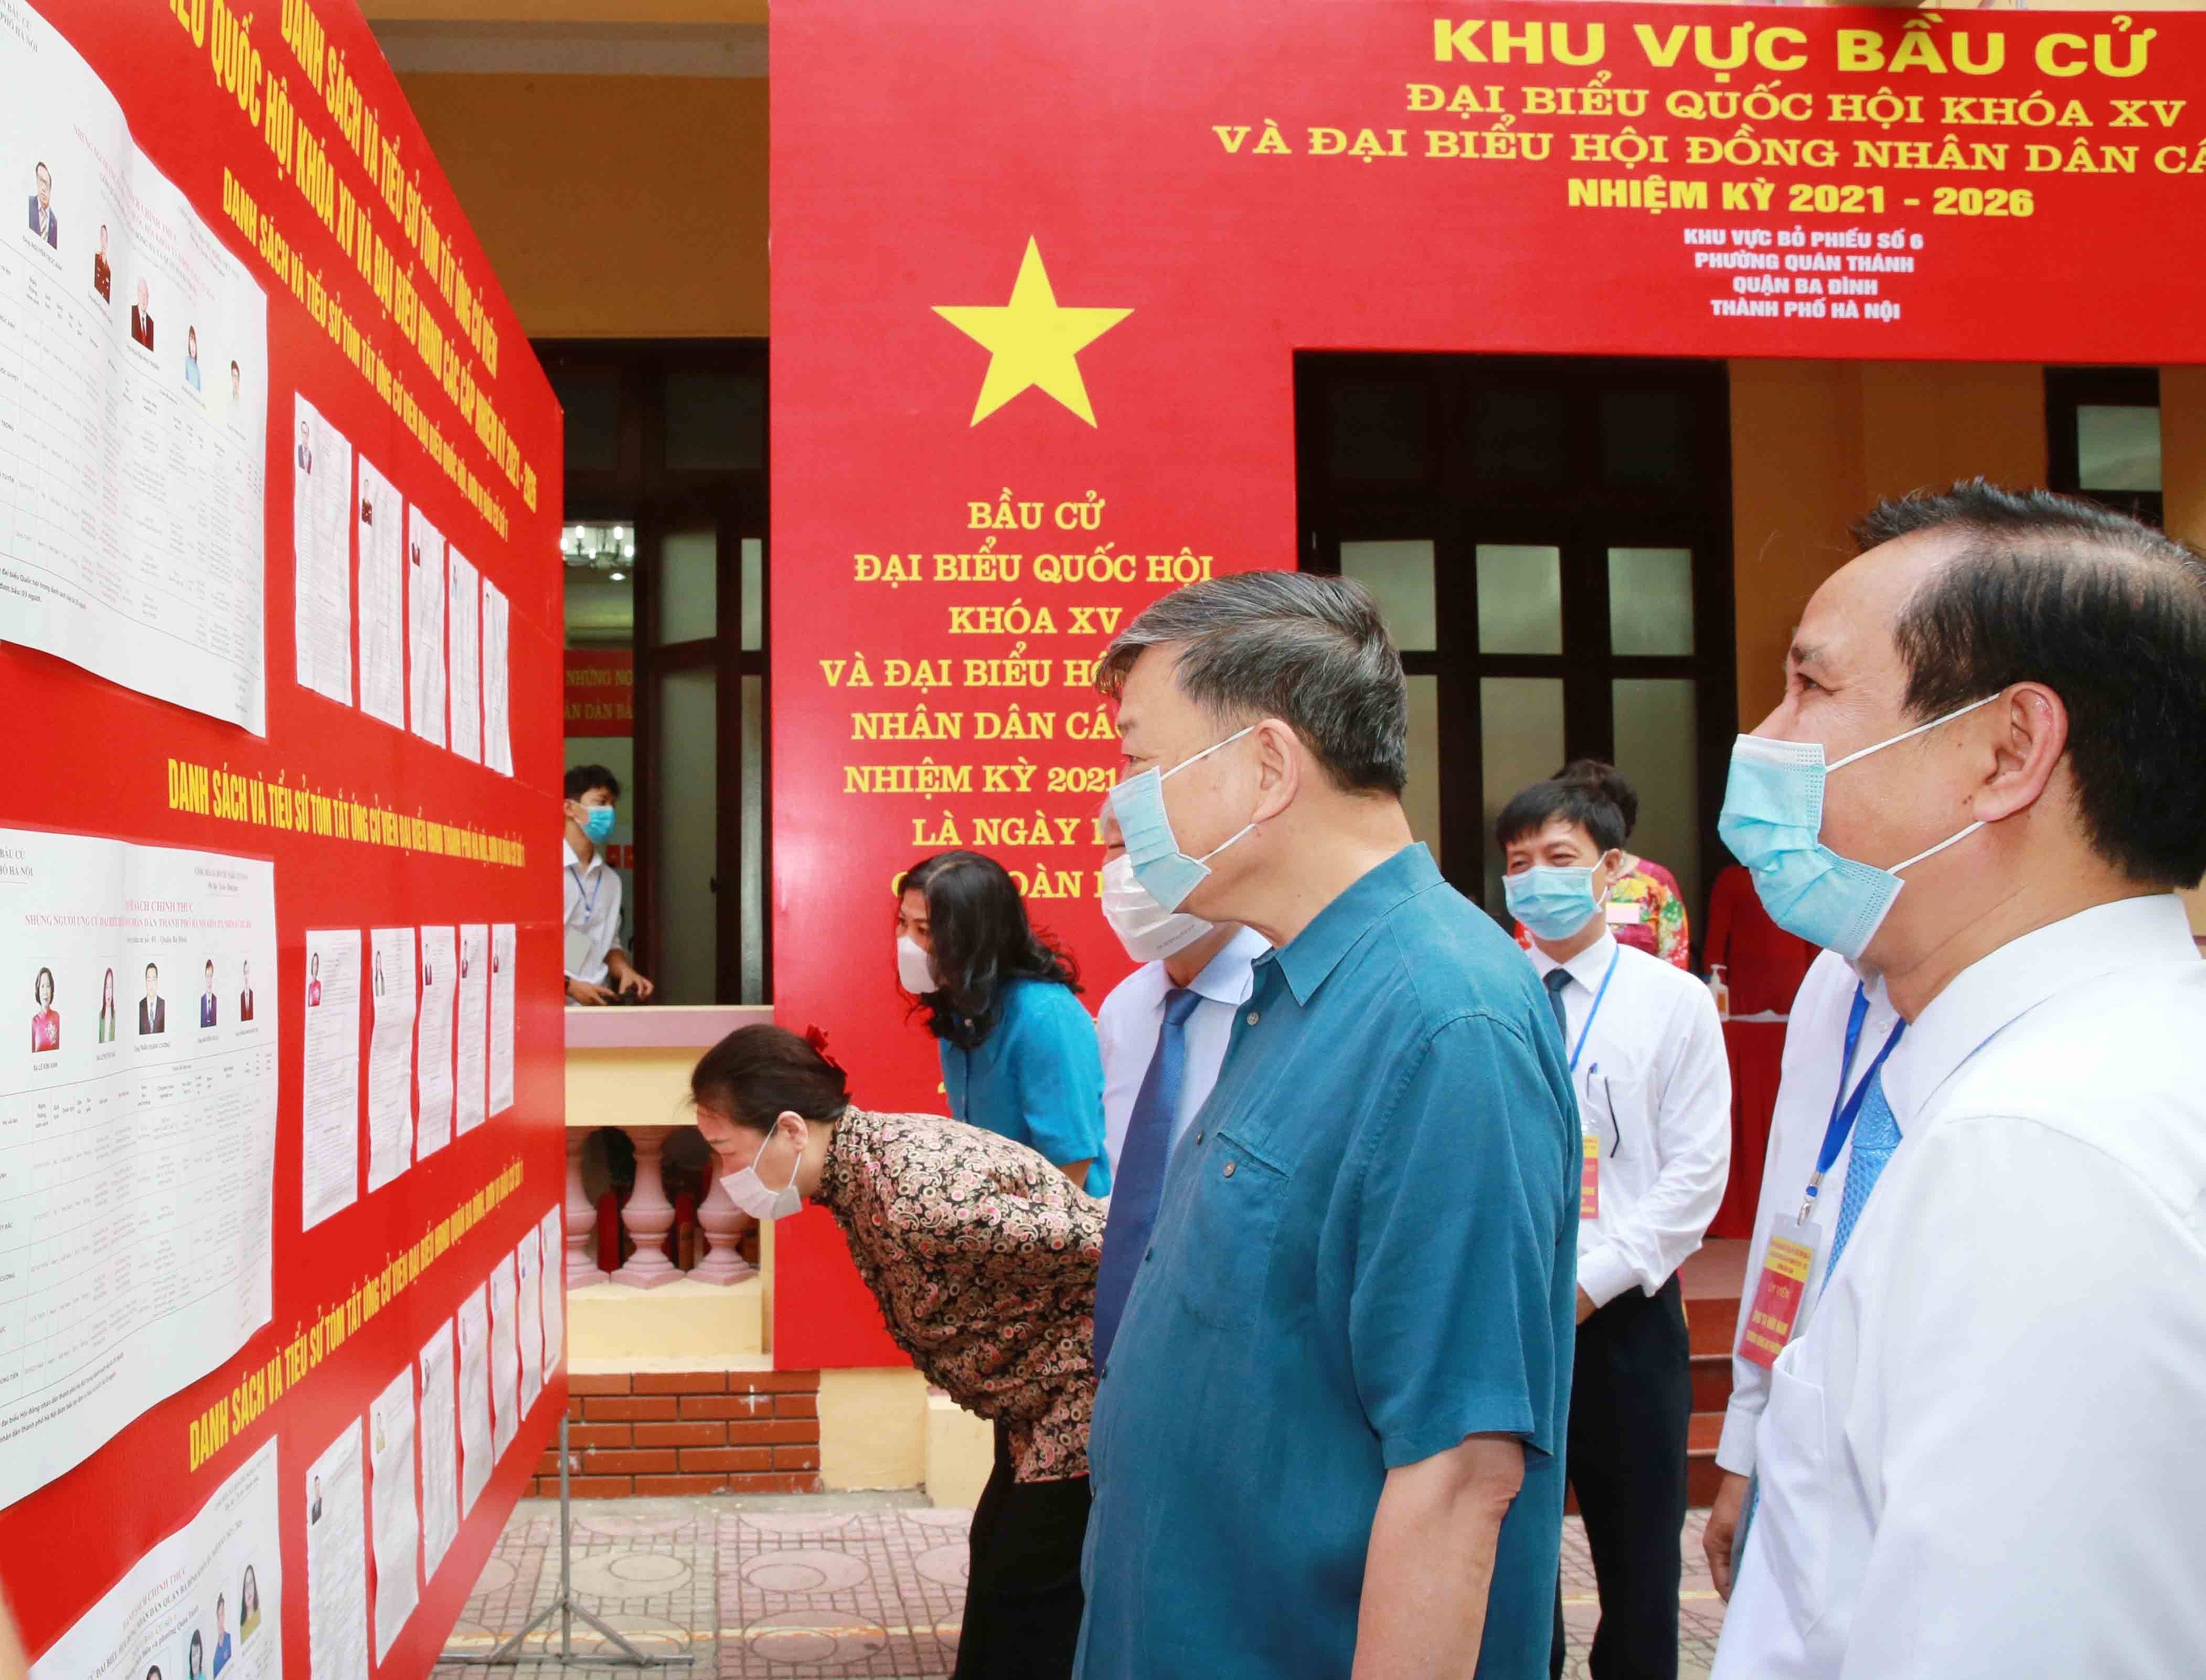 Voters nationwide cast ballots hinh anh 7